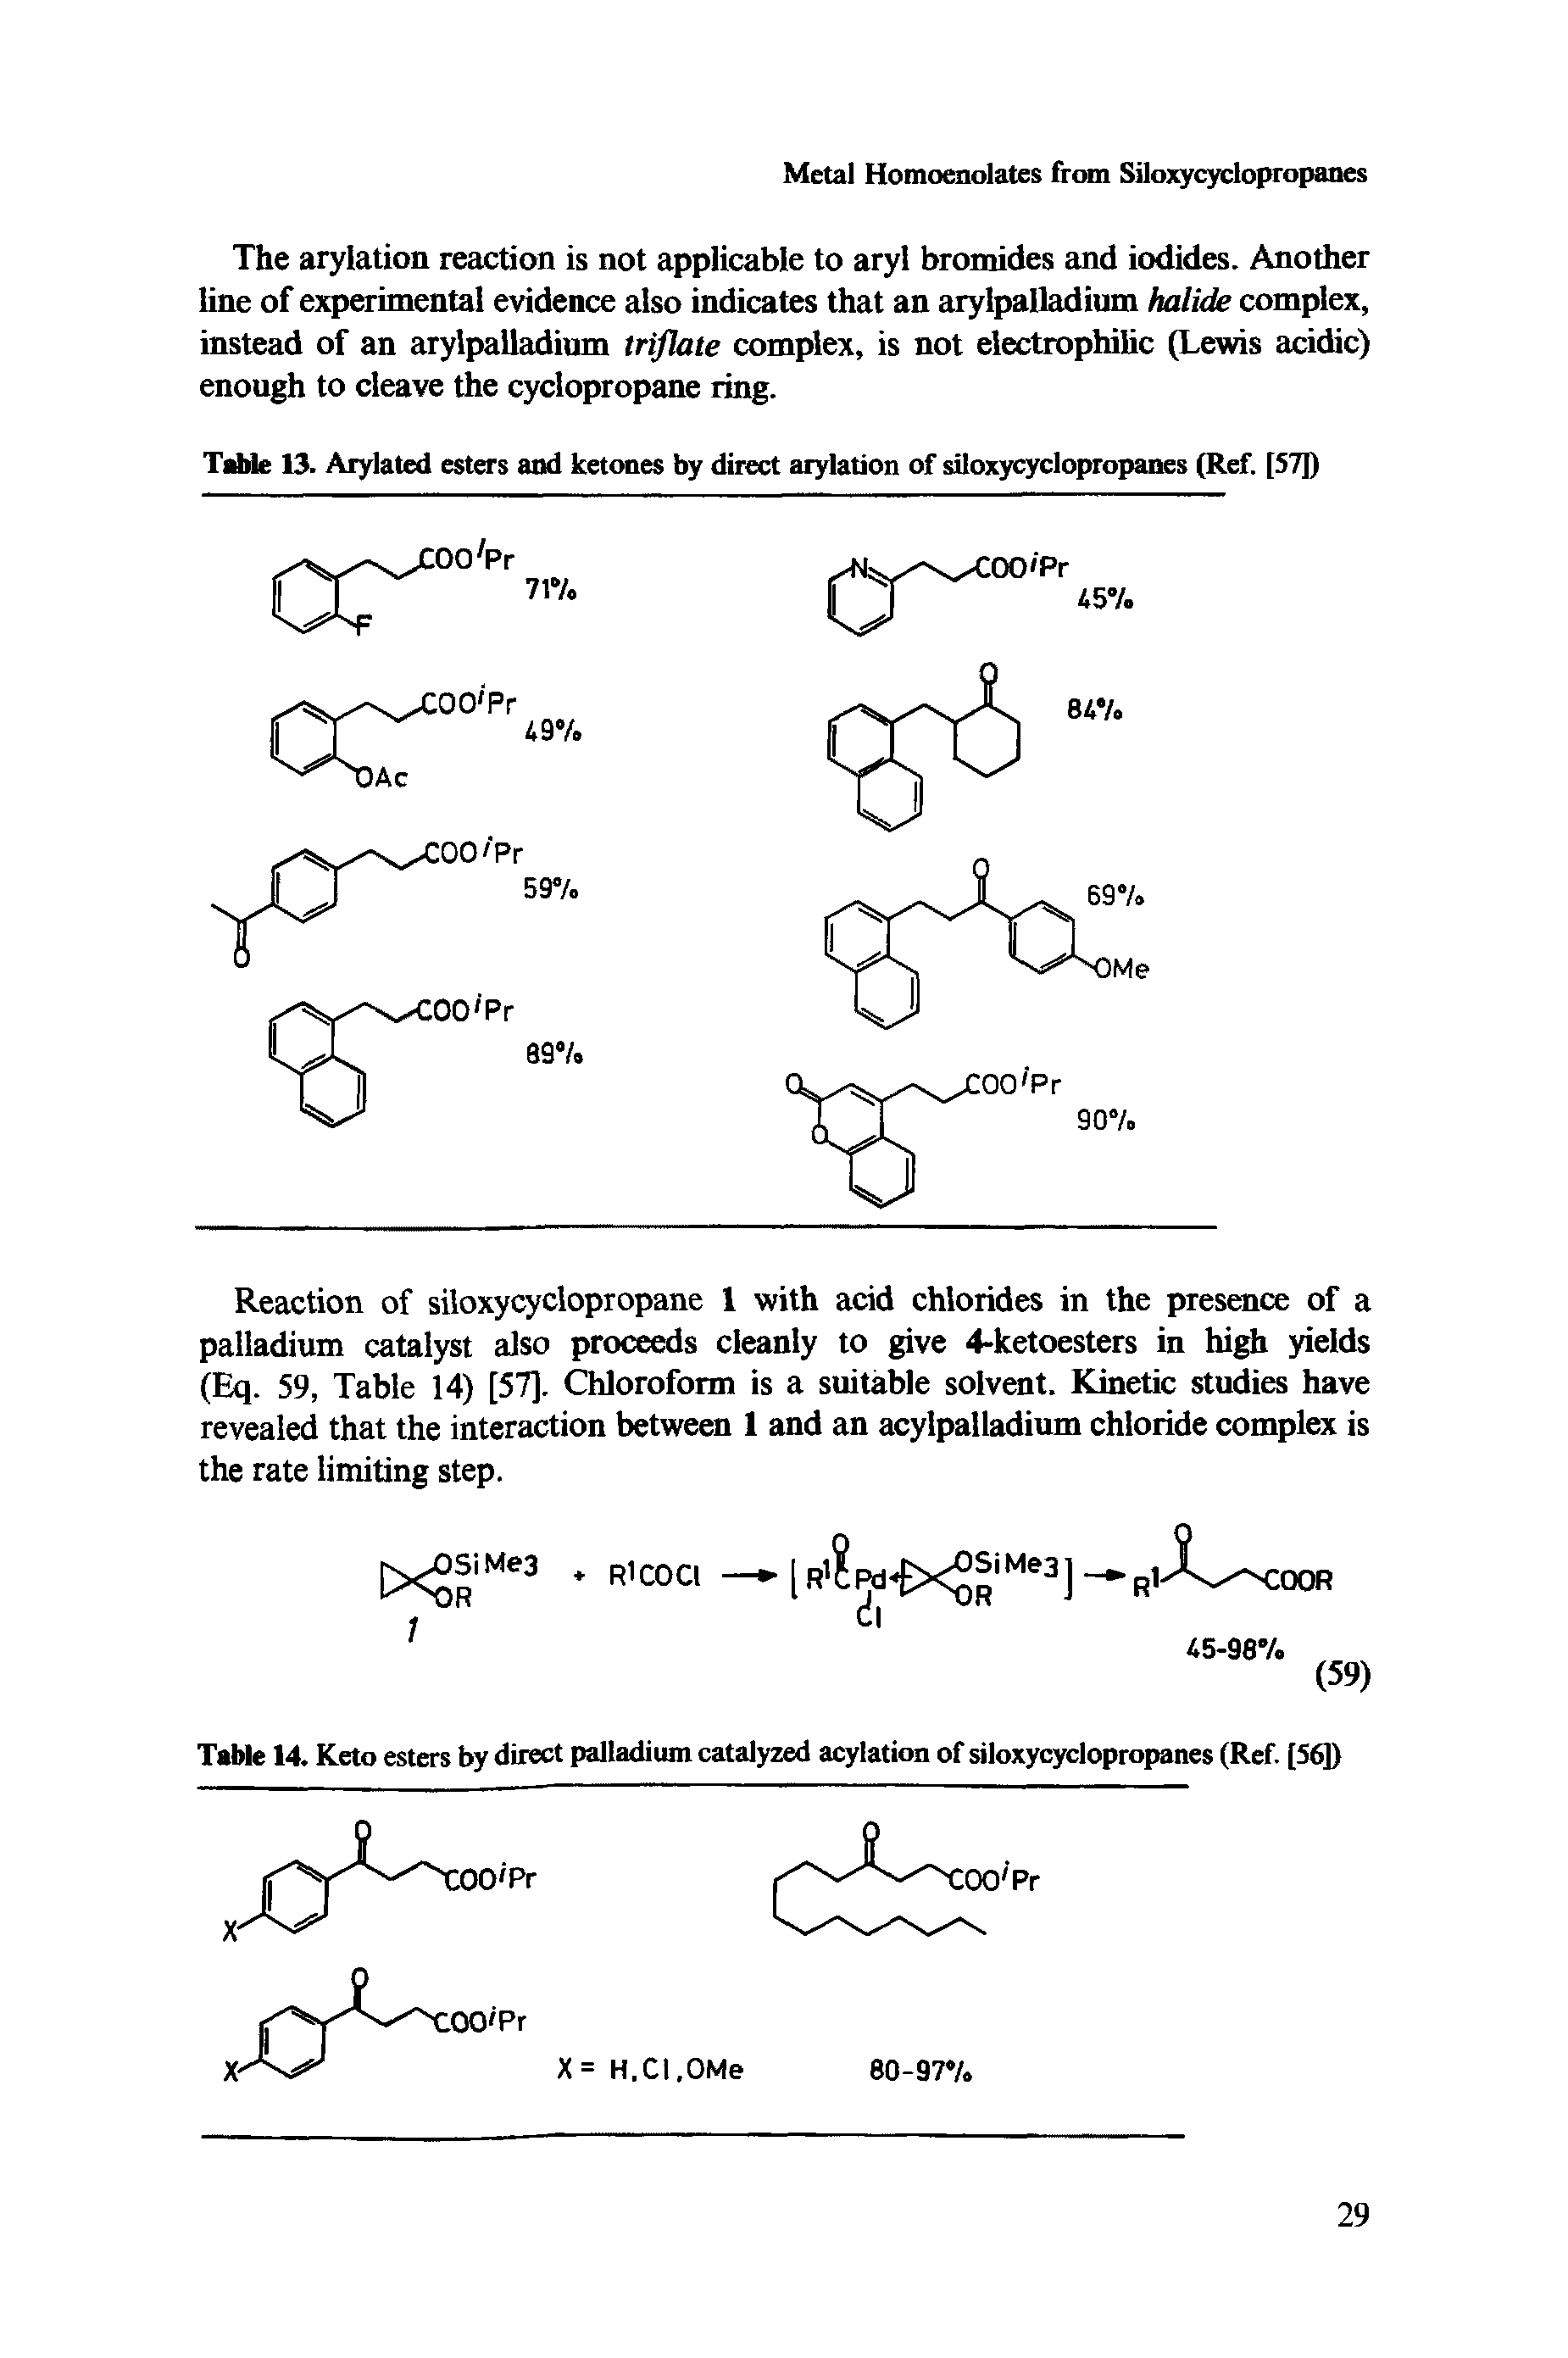 Table 13. Arylated esters and ketones by direct arylation of siloxycyclopropanes (Ref. [57])...